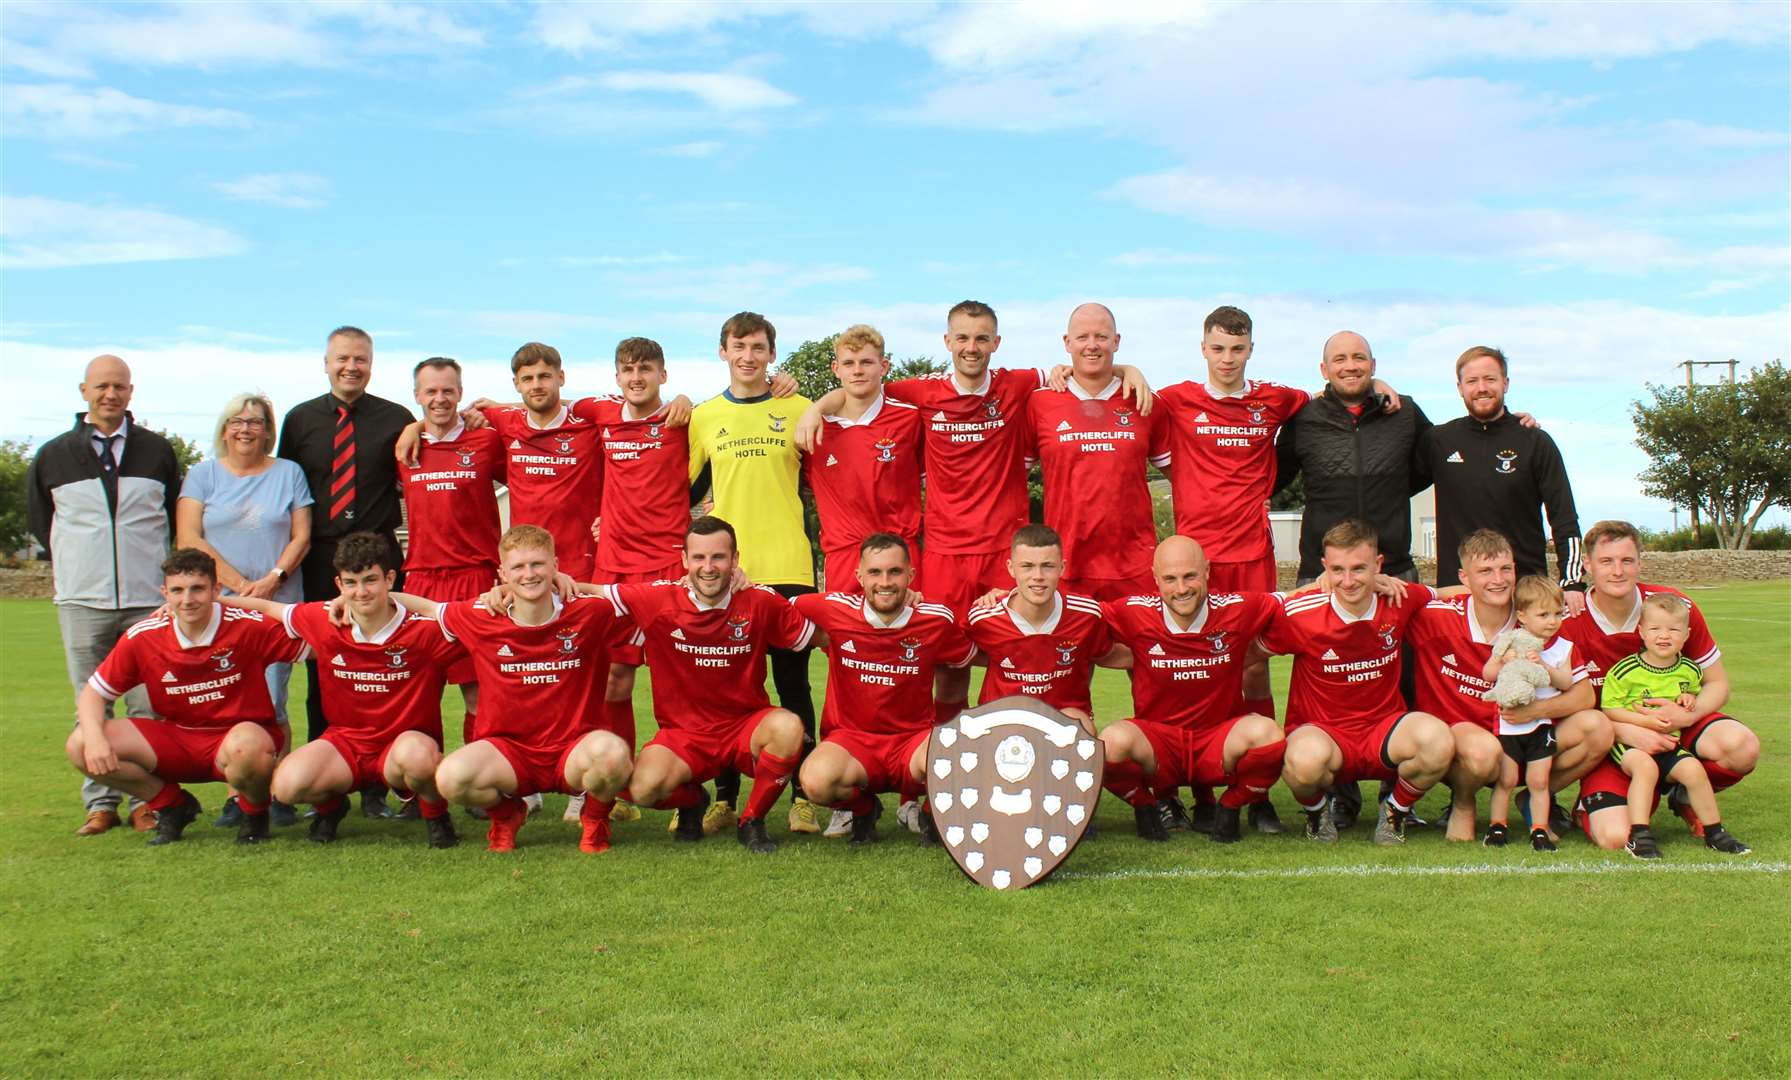 Wick Groats players and management after their victory over High Ormlie Hotspur in Saturday's David Allan Shield final at Castletown, with Linda Moran, daughter of David Allan, and Andrew Lannon, Caithness AFA secretary (left). Picture: Picture House Films